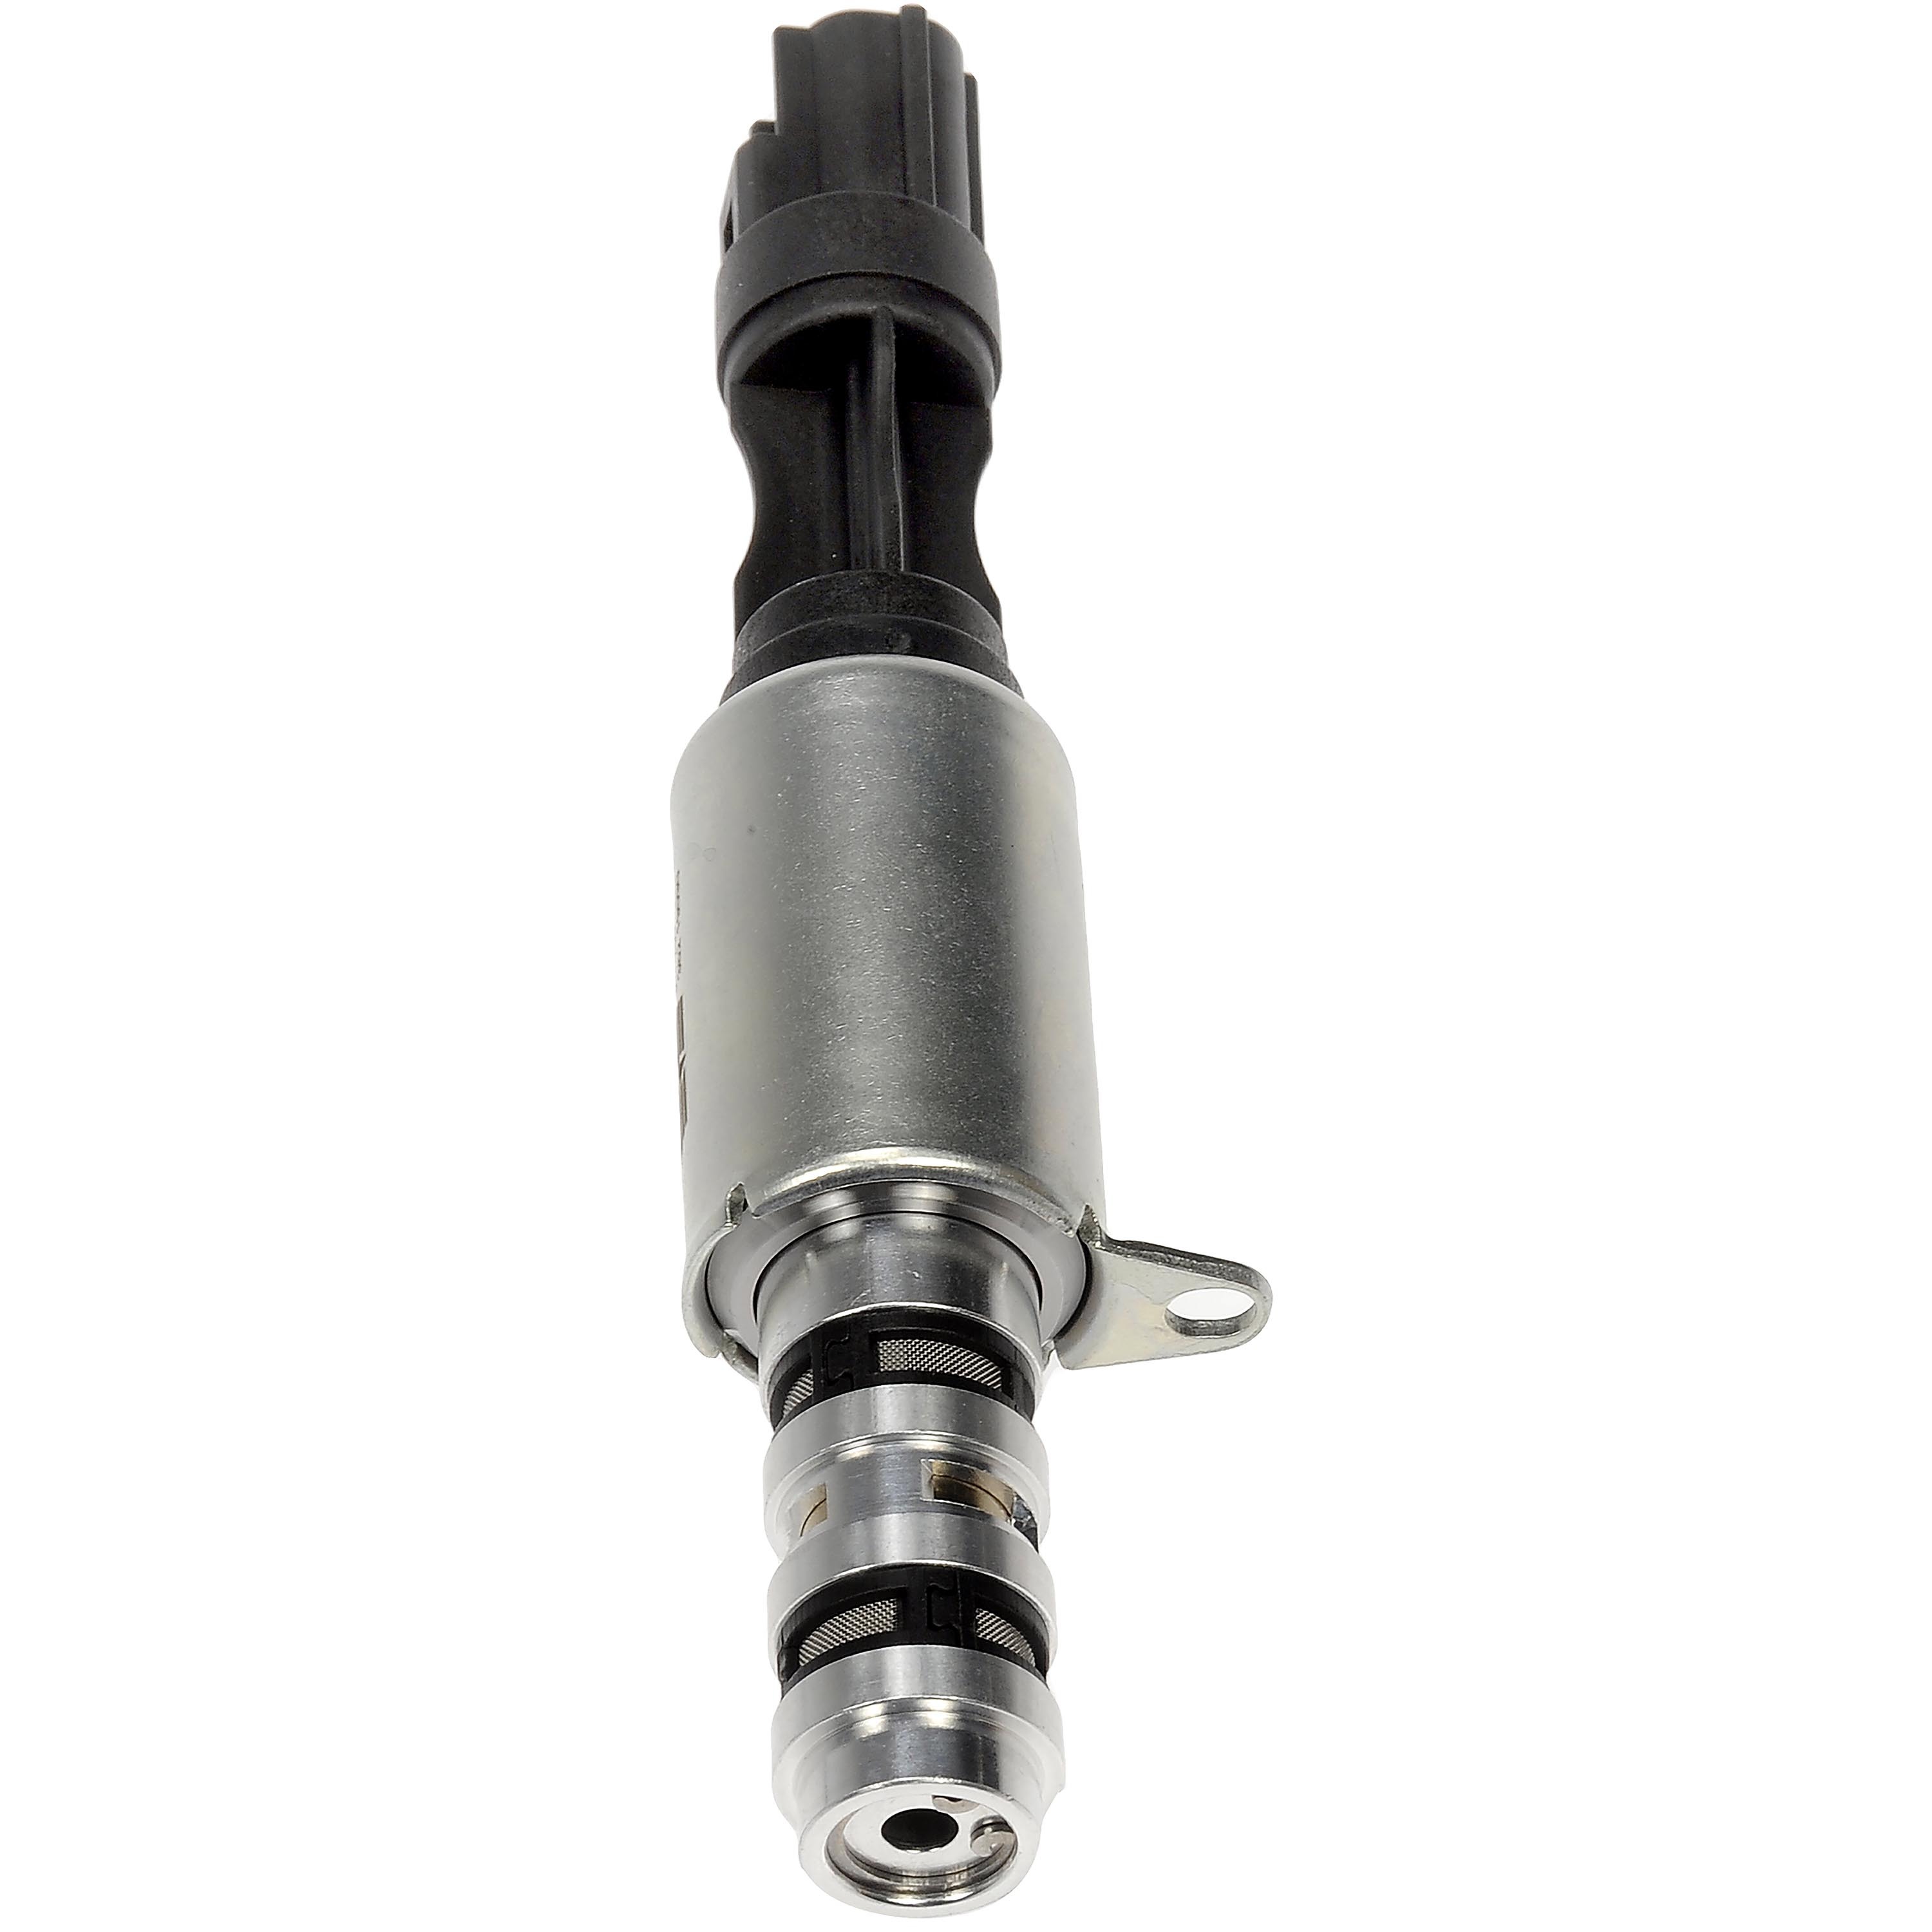 Dorman 917-200 Engine Variable Valve Timing (VVT) Solenoid for Specific  Ford Lincoln Mercury Models